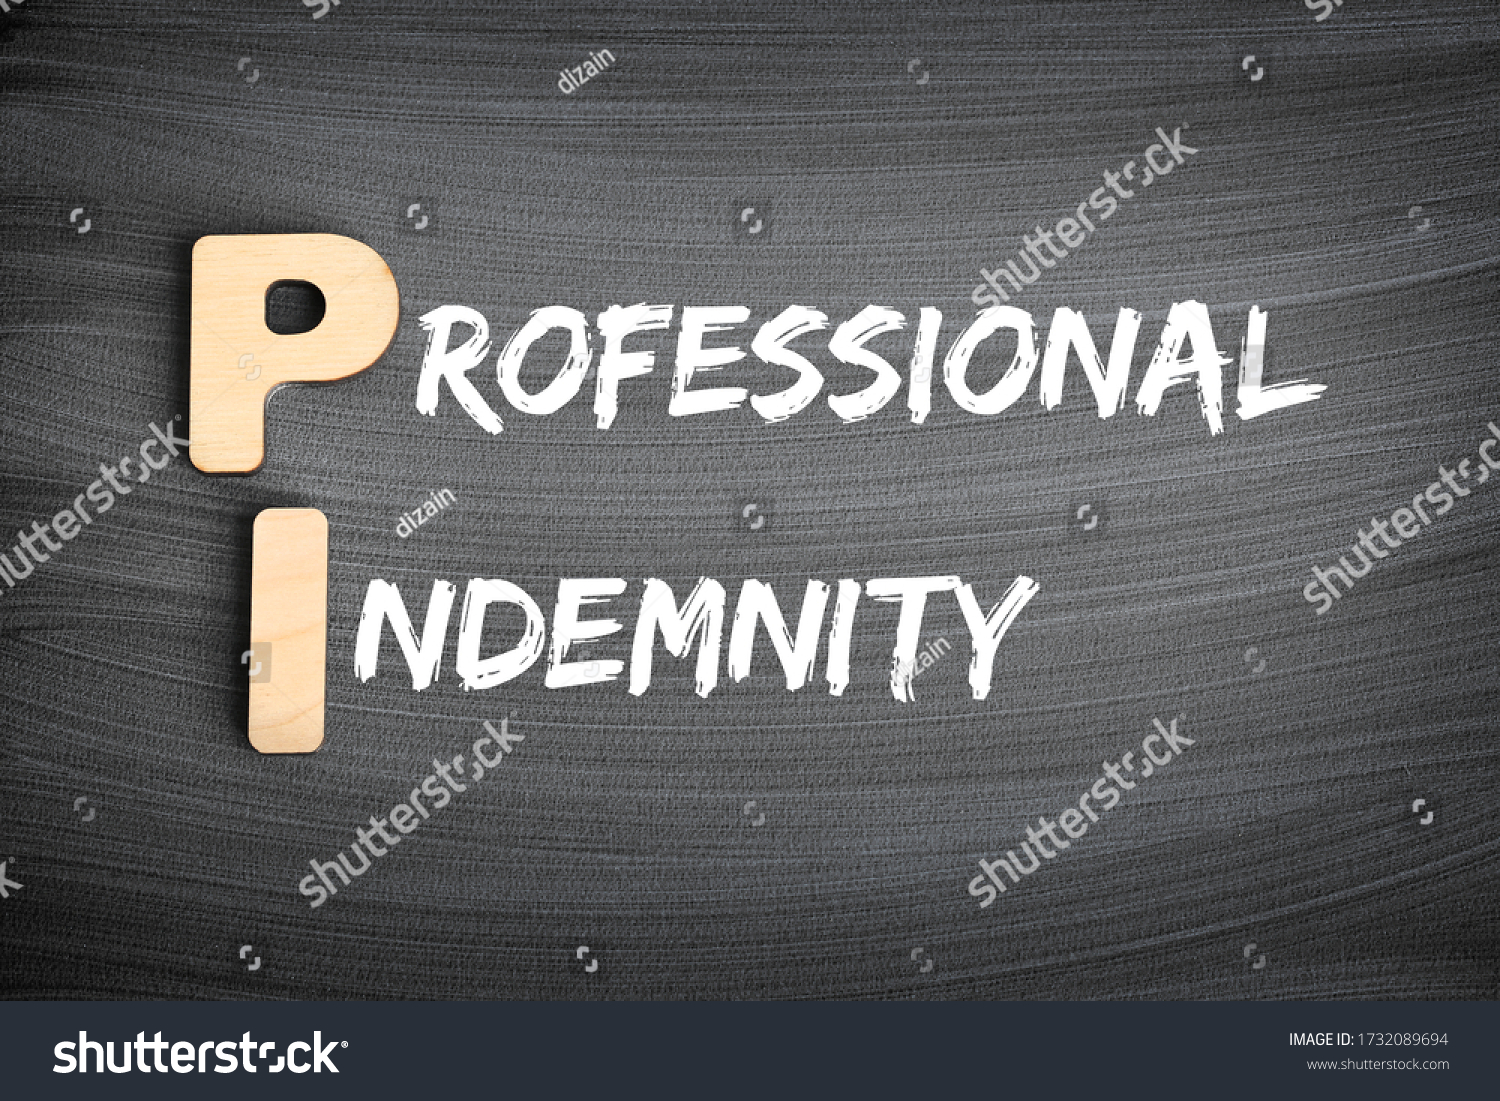 PI Professional Indemnity (insurance coverage) - protects you against claims for loss or damage made by clients or third parties, acronym text concept on blackboard #1732089694